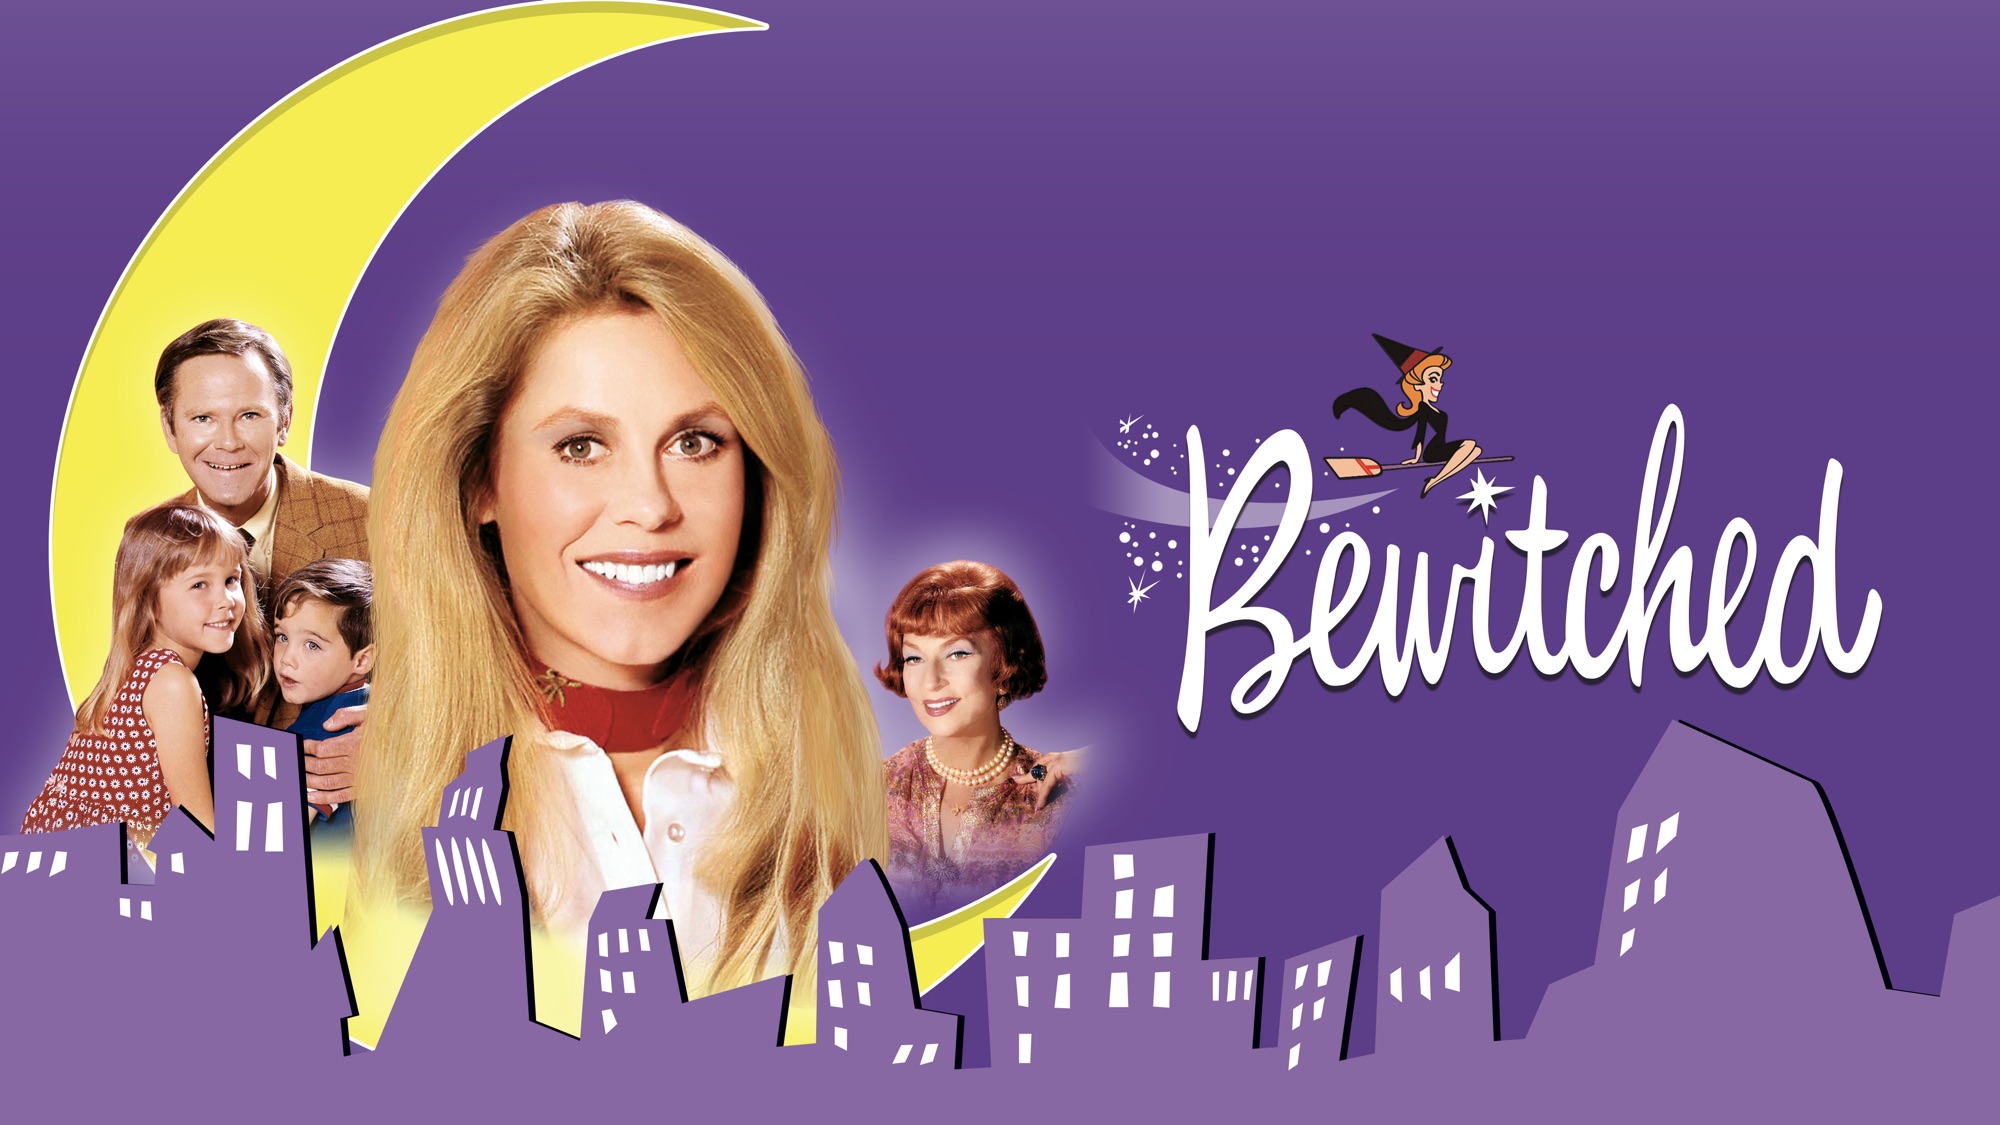 Best Bewitched Full HD Wallpaper